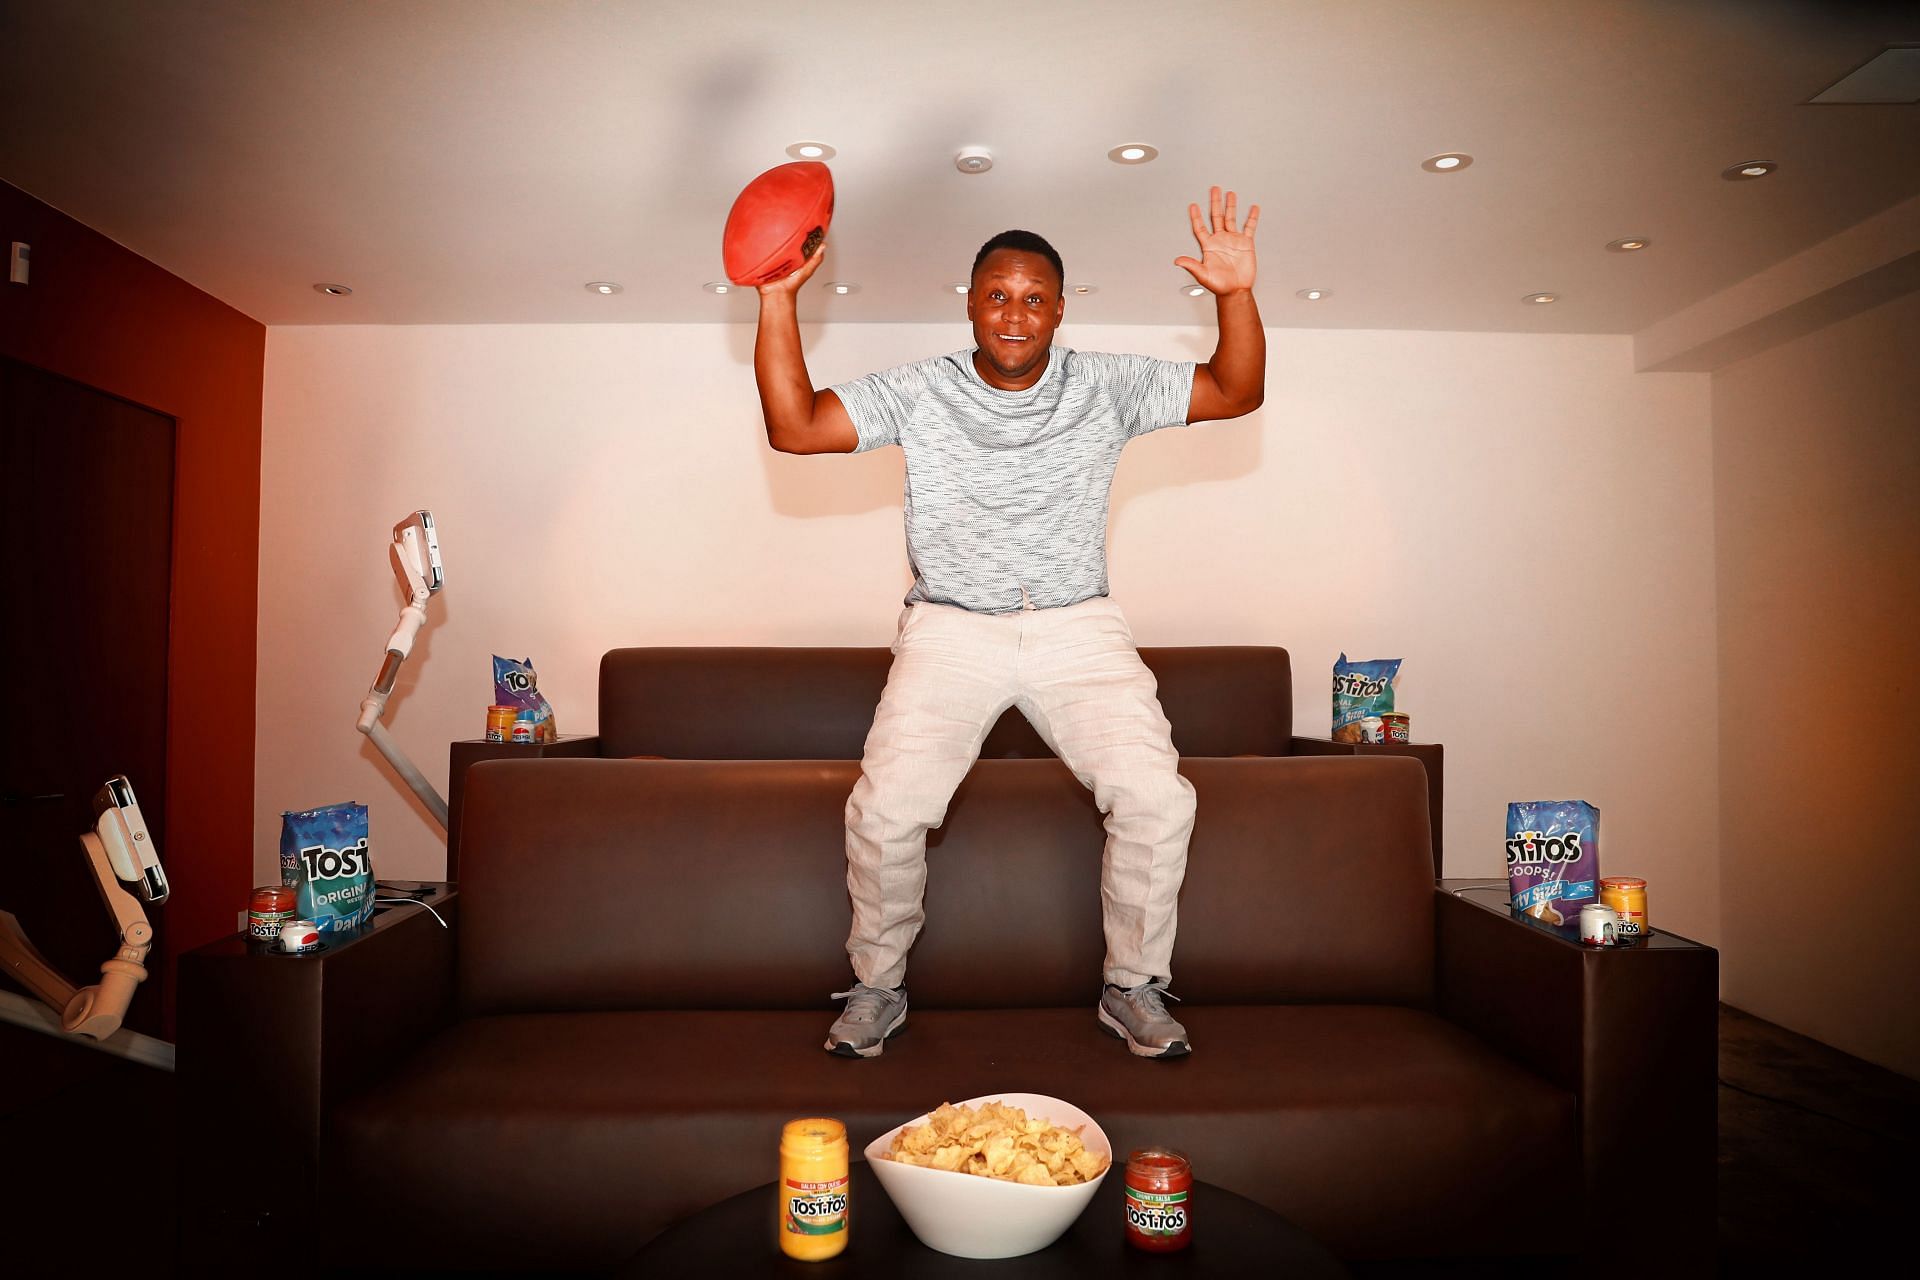 Former NFL Legend Barry Sanders has perfected the art of the Homegate and the Tostitos Stadium Sofa takes viewing parties to the next level on August 31, 2018